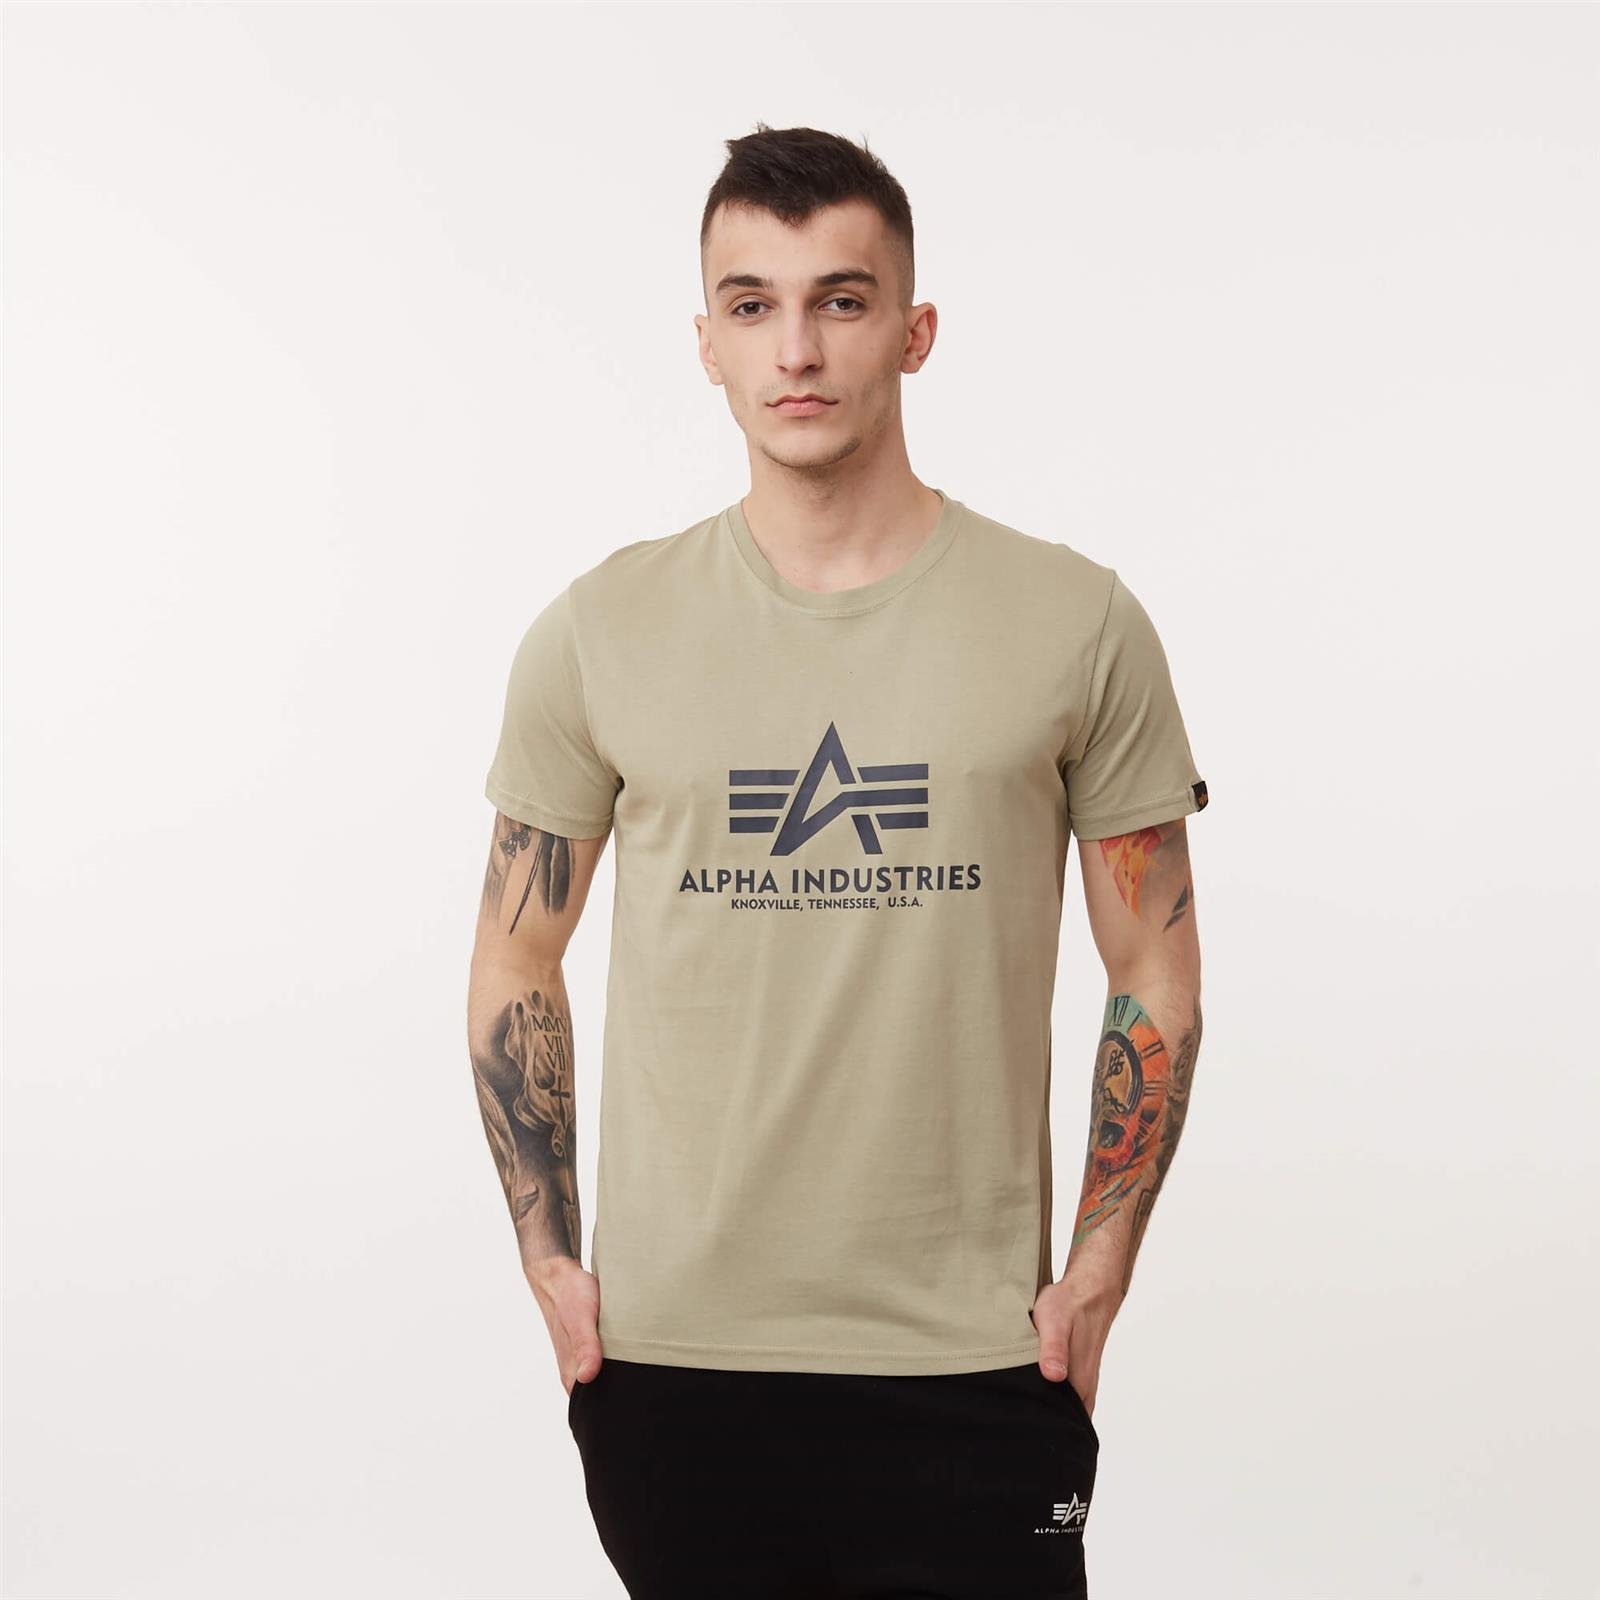 Industries \\ #Brands clothing OLIVE \\ Alpha T-SHIRT brands Industries Ellesse \\ \\ clothing | #Recommended BASIC Men Brands T-shirts \\ Men Alpha LIGHT Men\'s \\